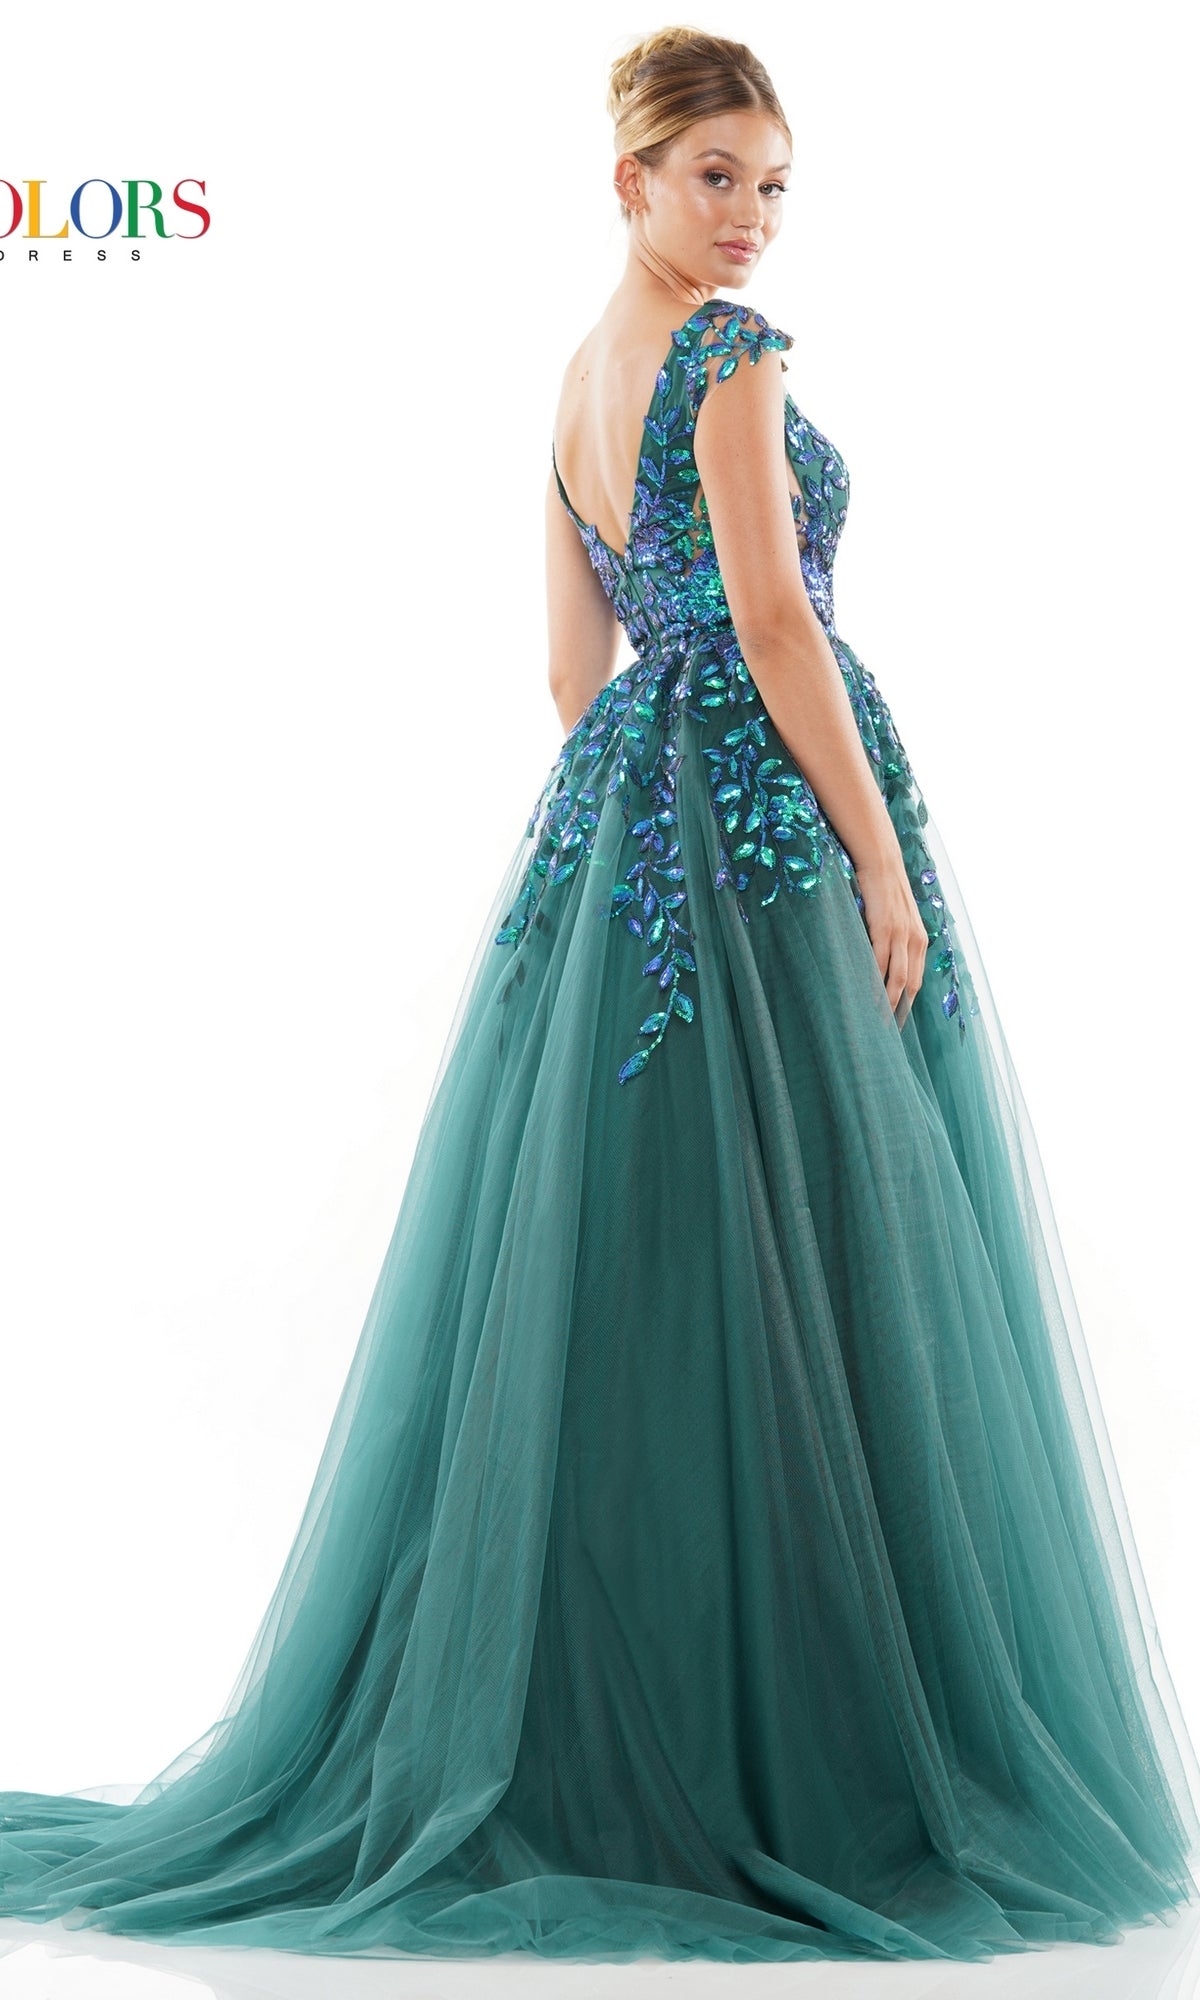 Long Prom Dress 3239 by Colors Dress